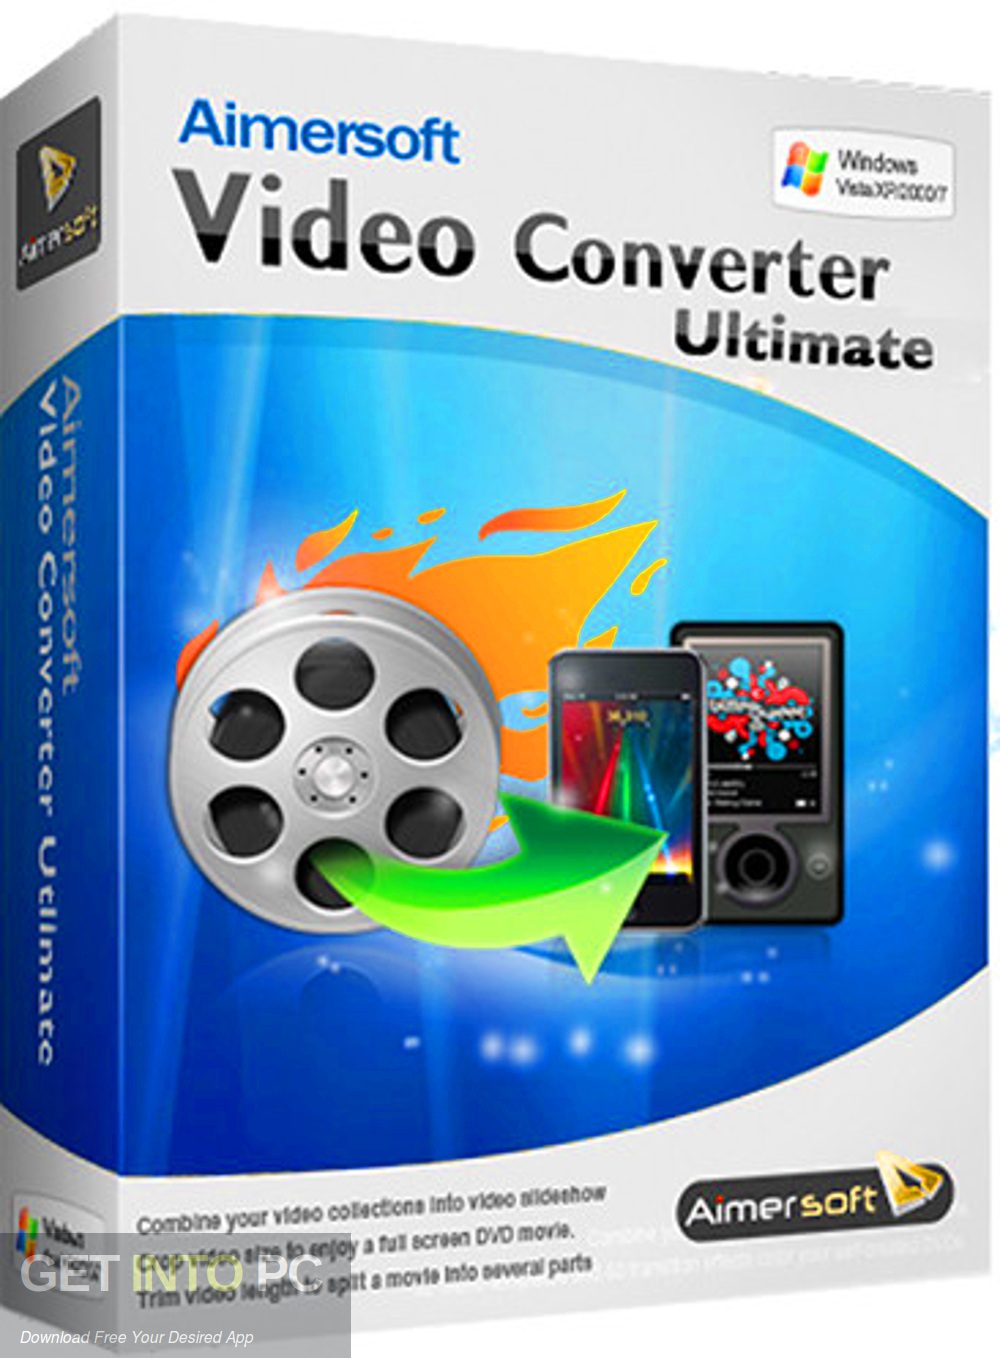 aimersoft-video-converter-ultimate-free-download-getintopc-com_-7236160